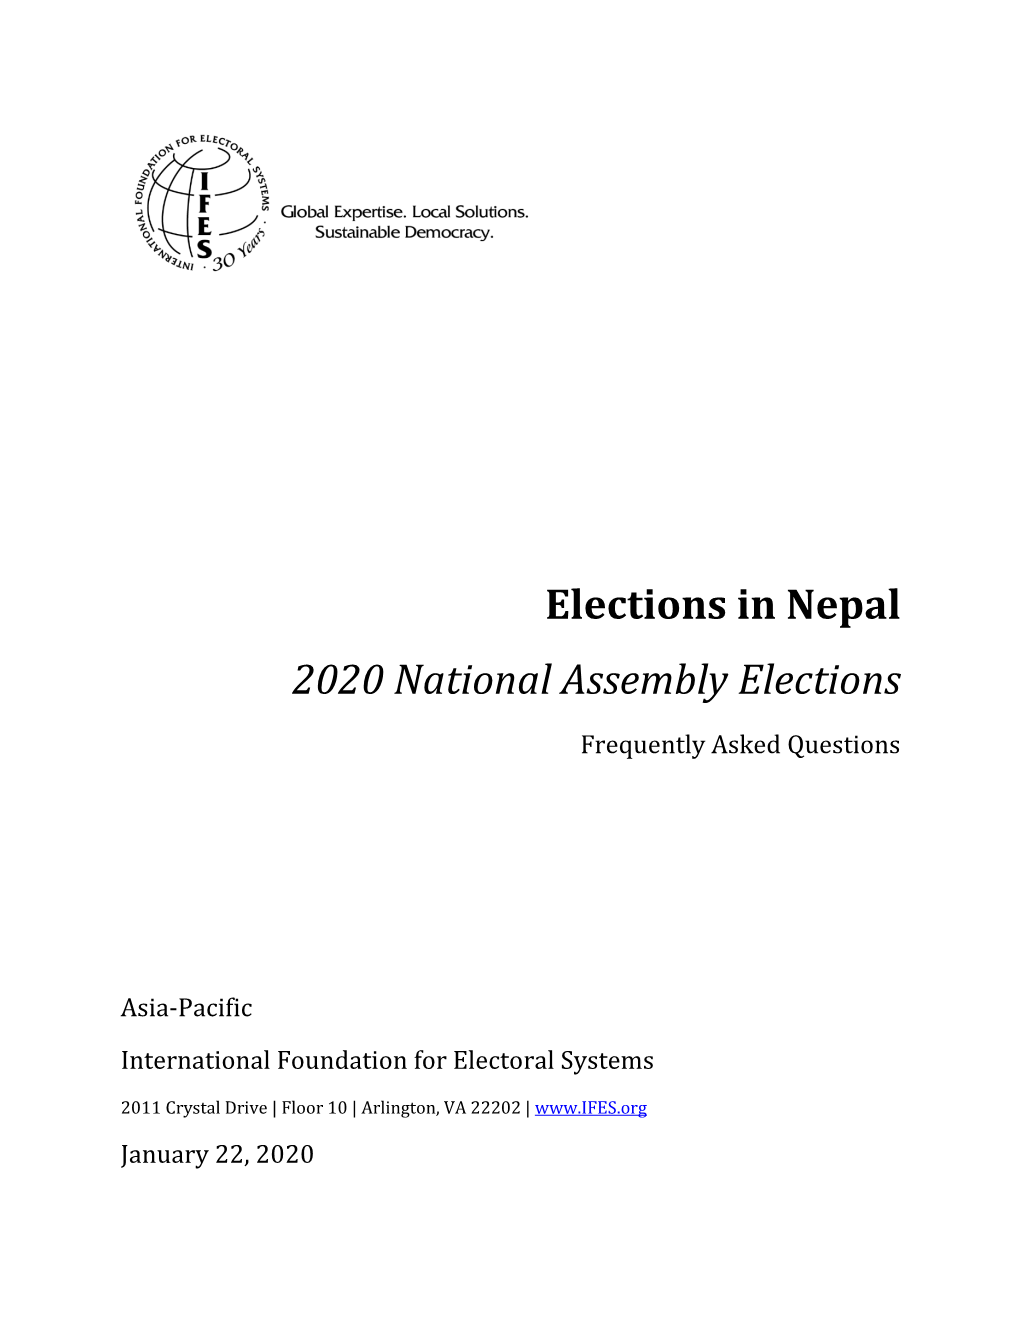 IFES, Faqs, 'Elections in Nepal: 2020 National Assembly Elections'